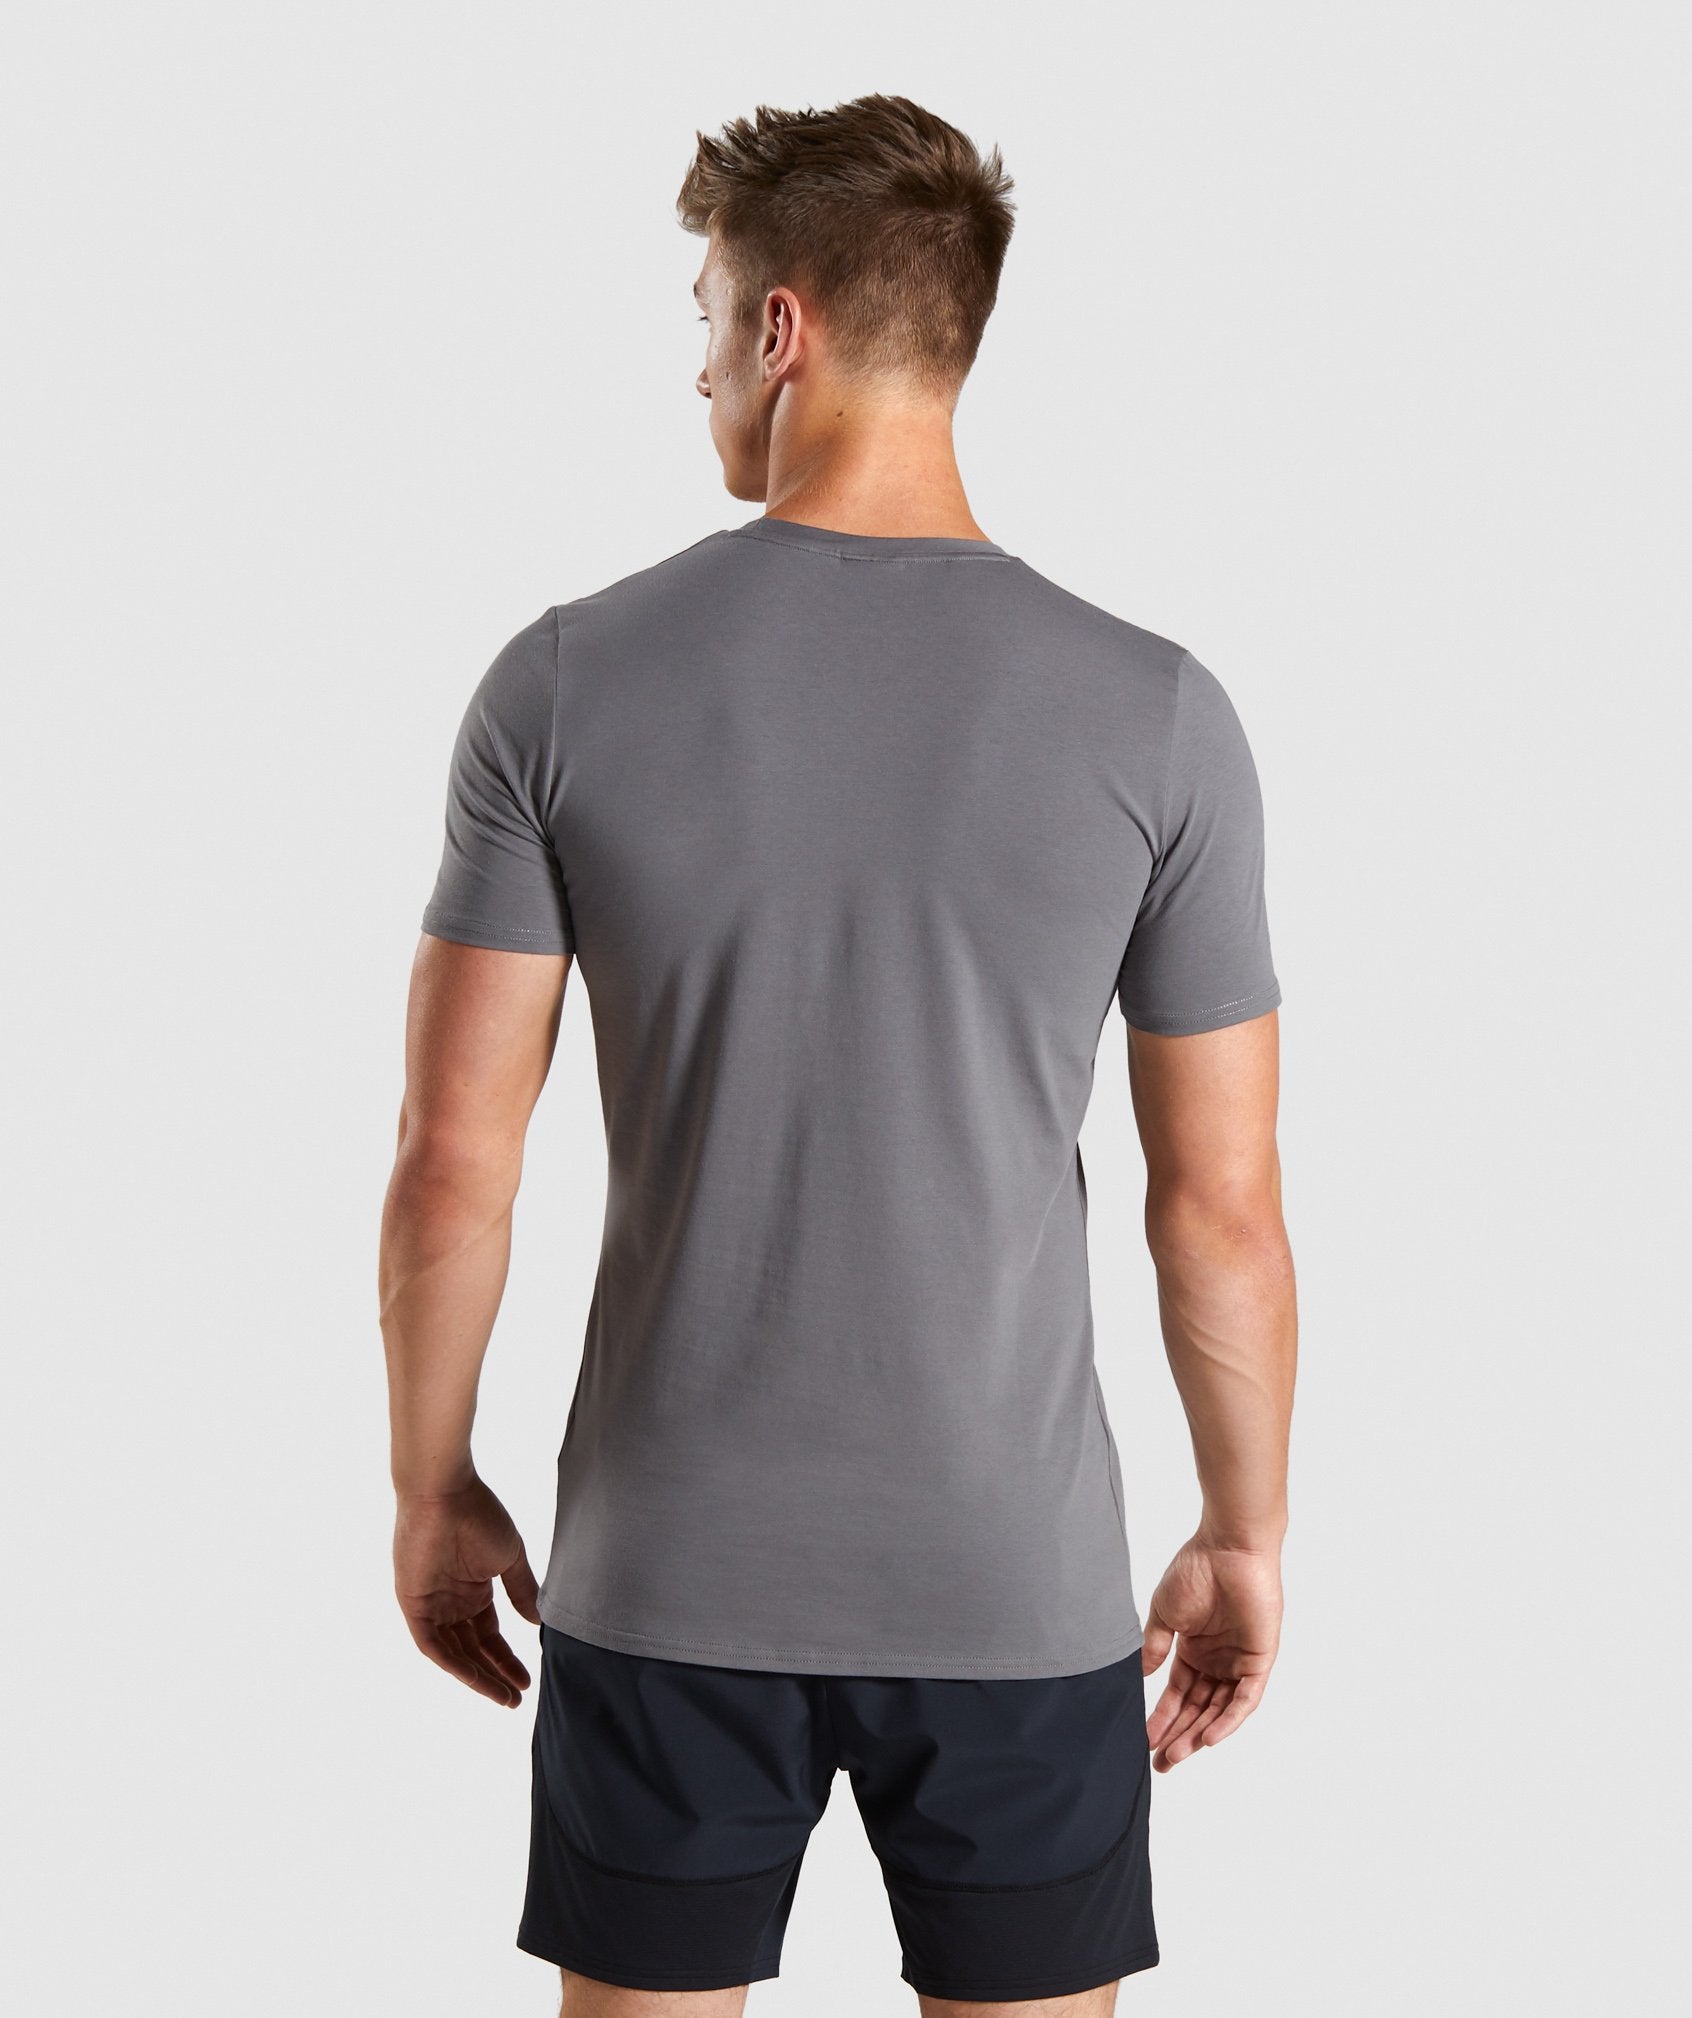 Base T-Shirt in Grey - view 2